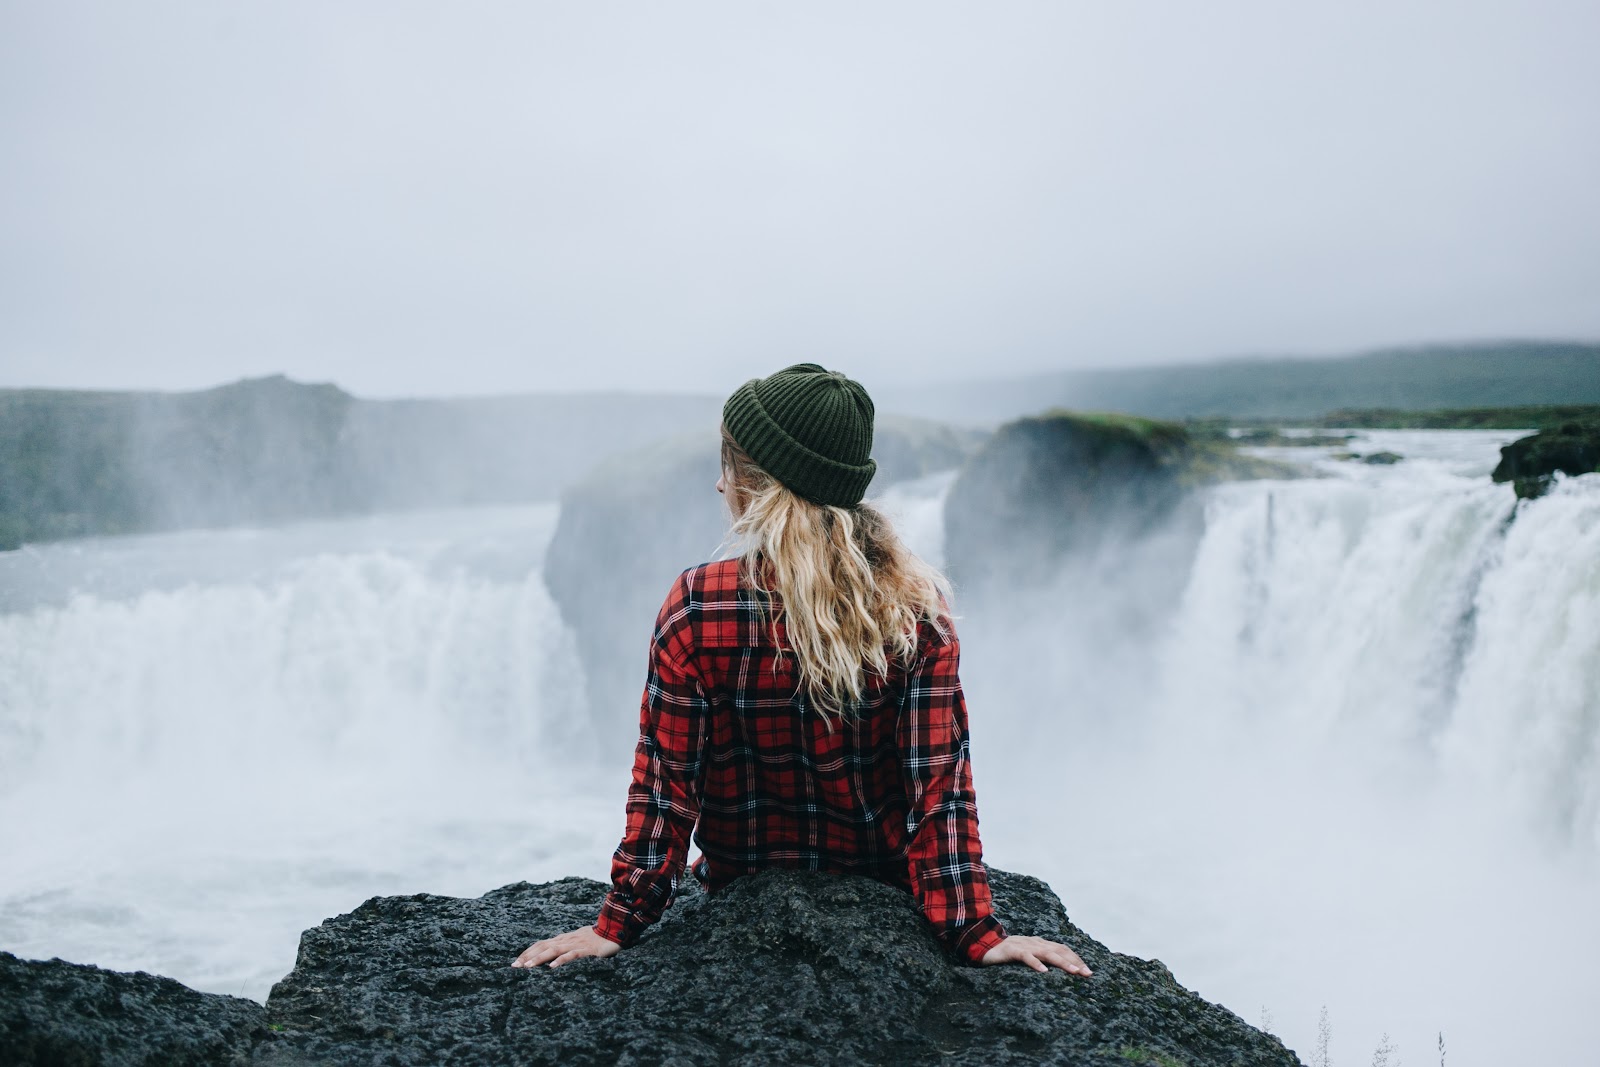 Solo female travellers make up the bulk of solo travellers. But we take a ton into consideration, like safety. Here are some of the best destinations for women who want to travel alone!